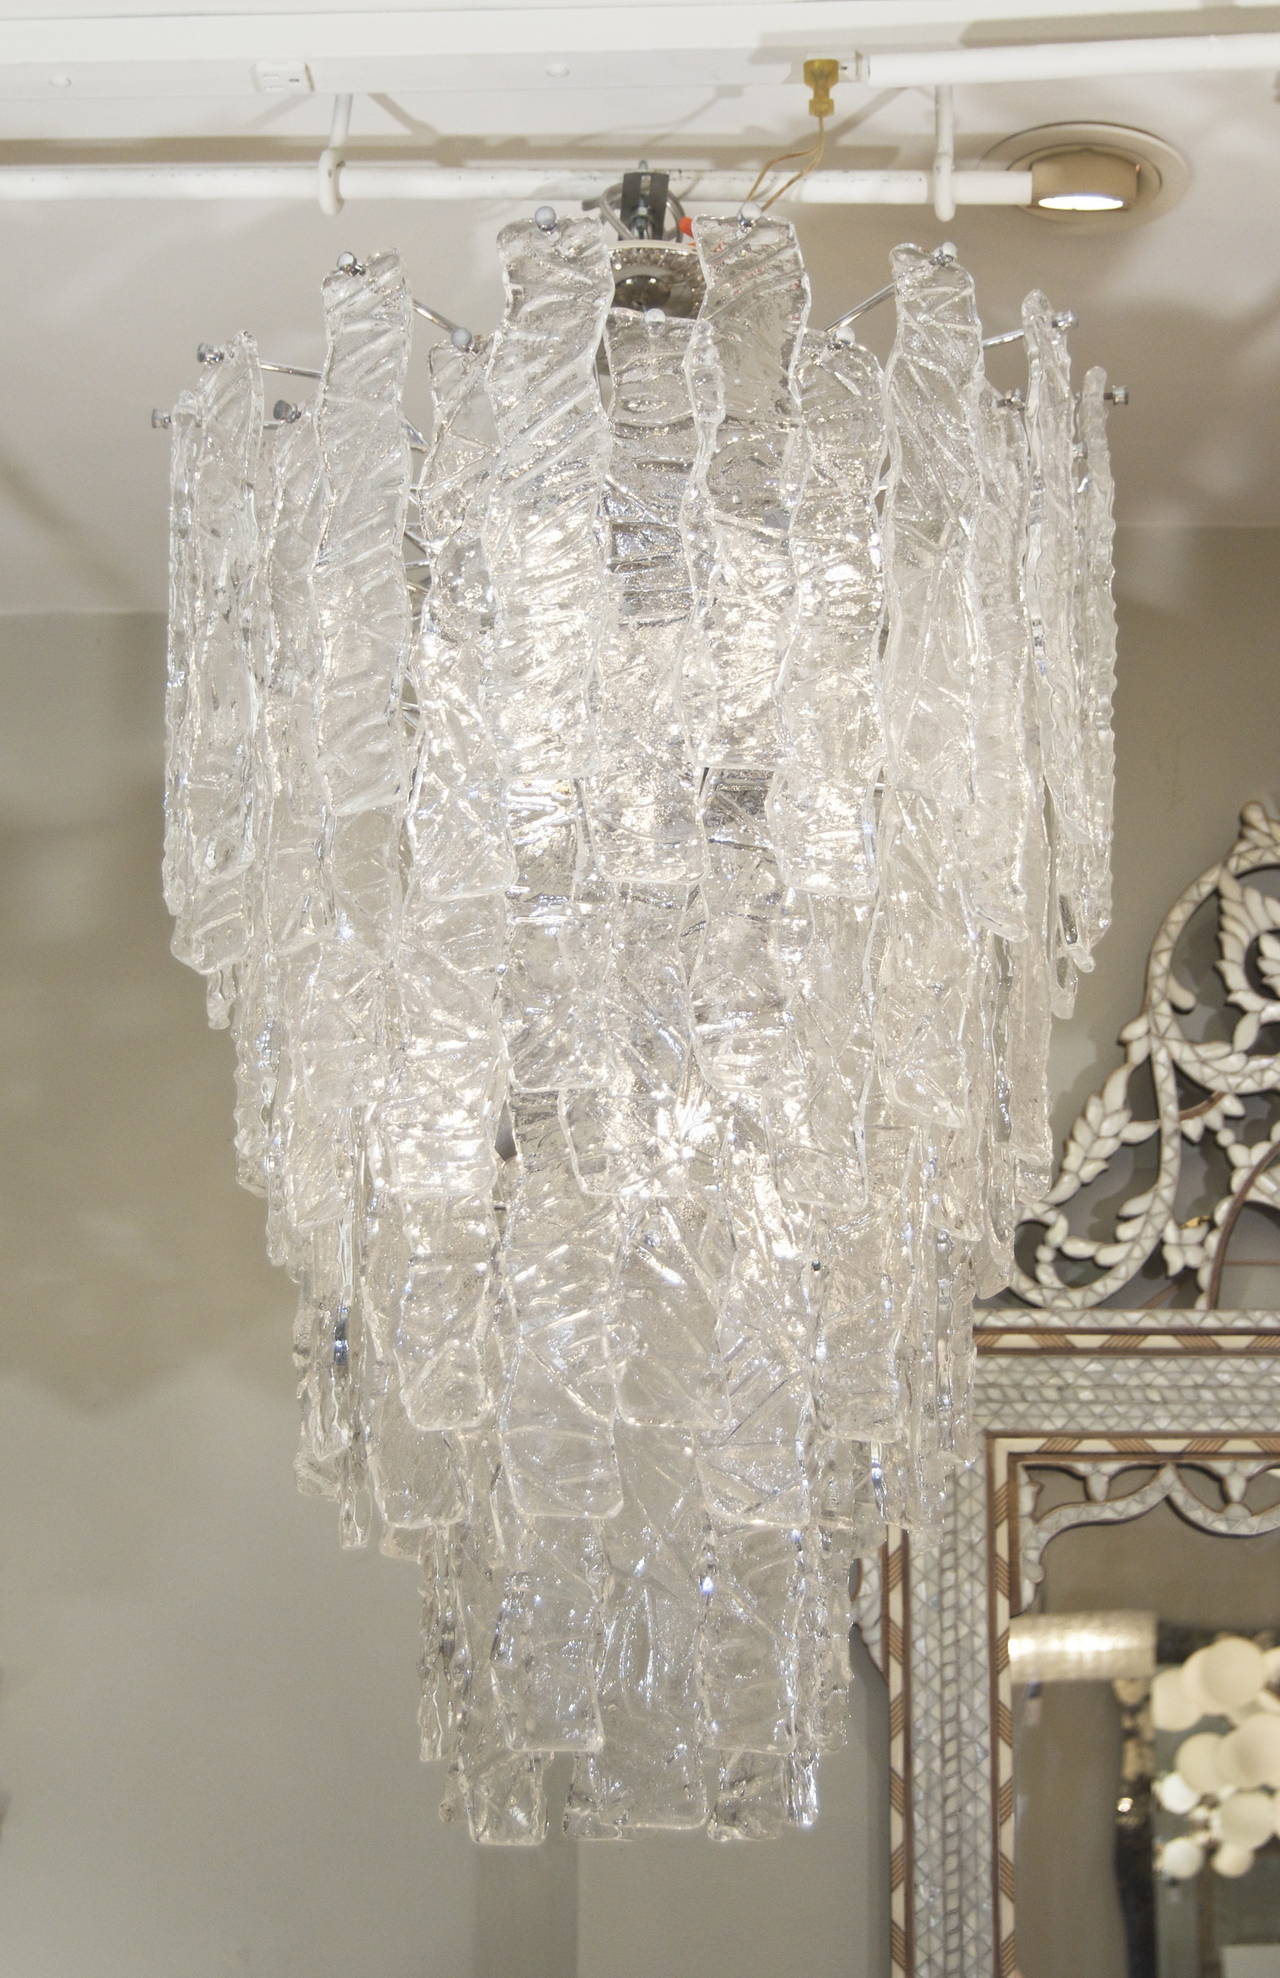 Fantastic Murano glass chandeliers possibly by Mazzega comprised of eight staggered tiers of vertical zig-zag glass with an ice crackle surface each piece 11" long, retained with chrome hardware. A grand scale and dramatic statement for any